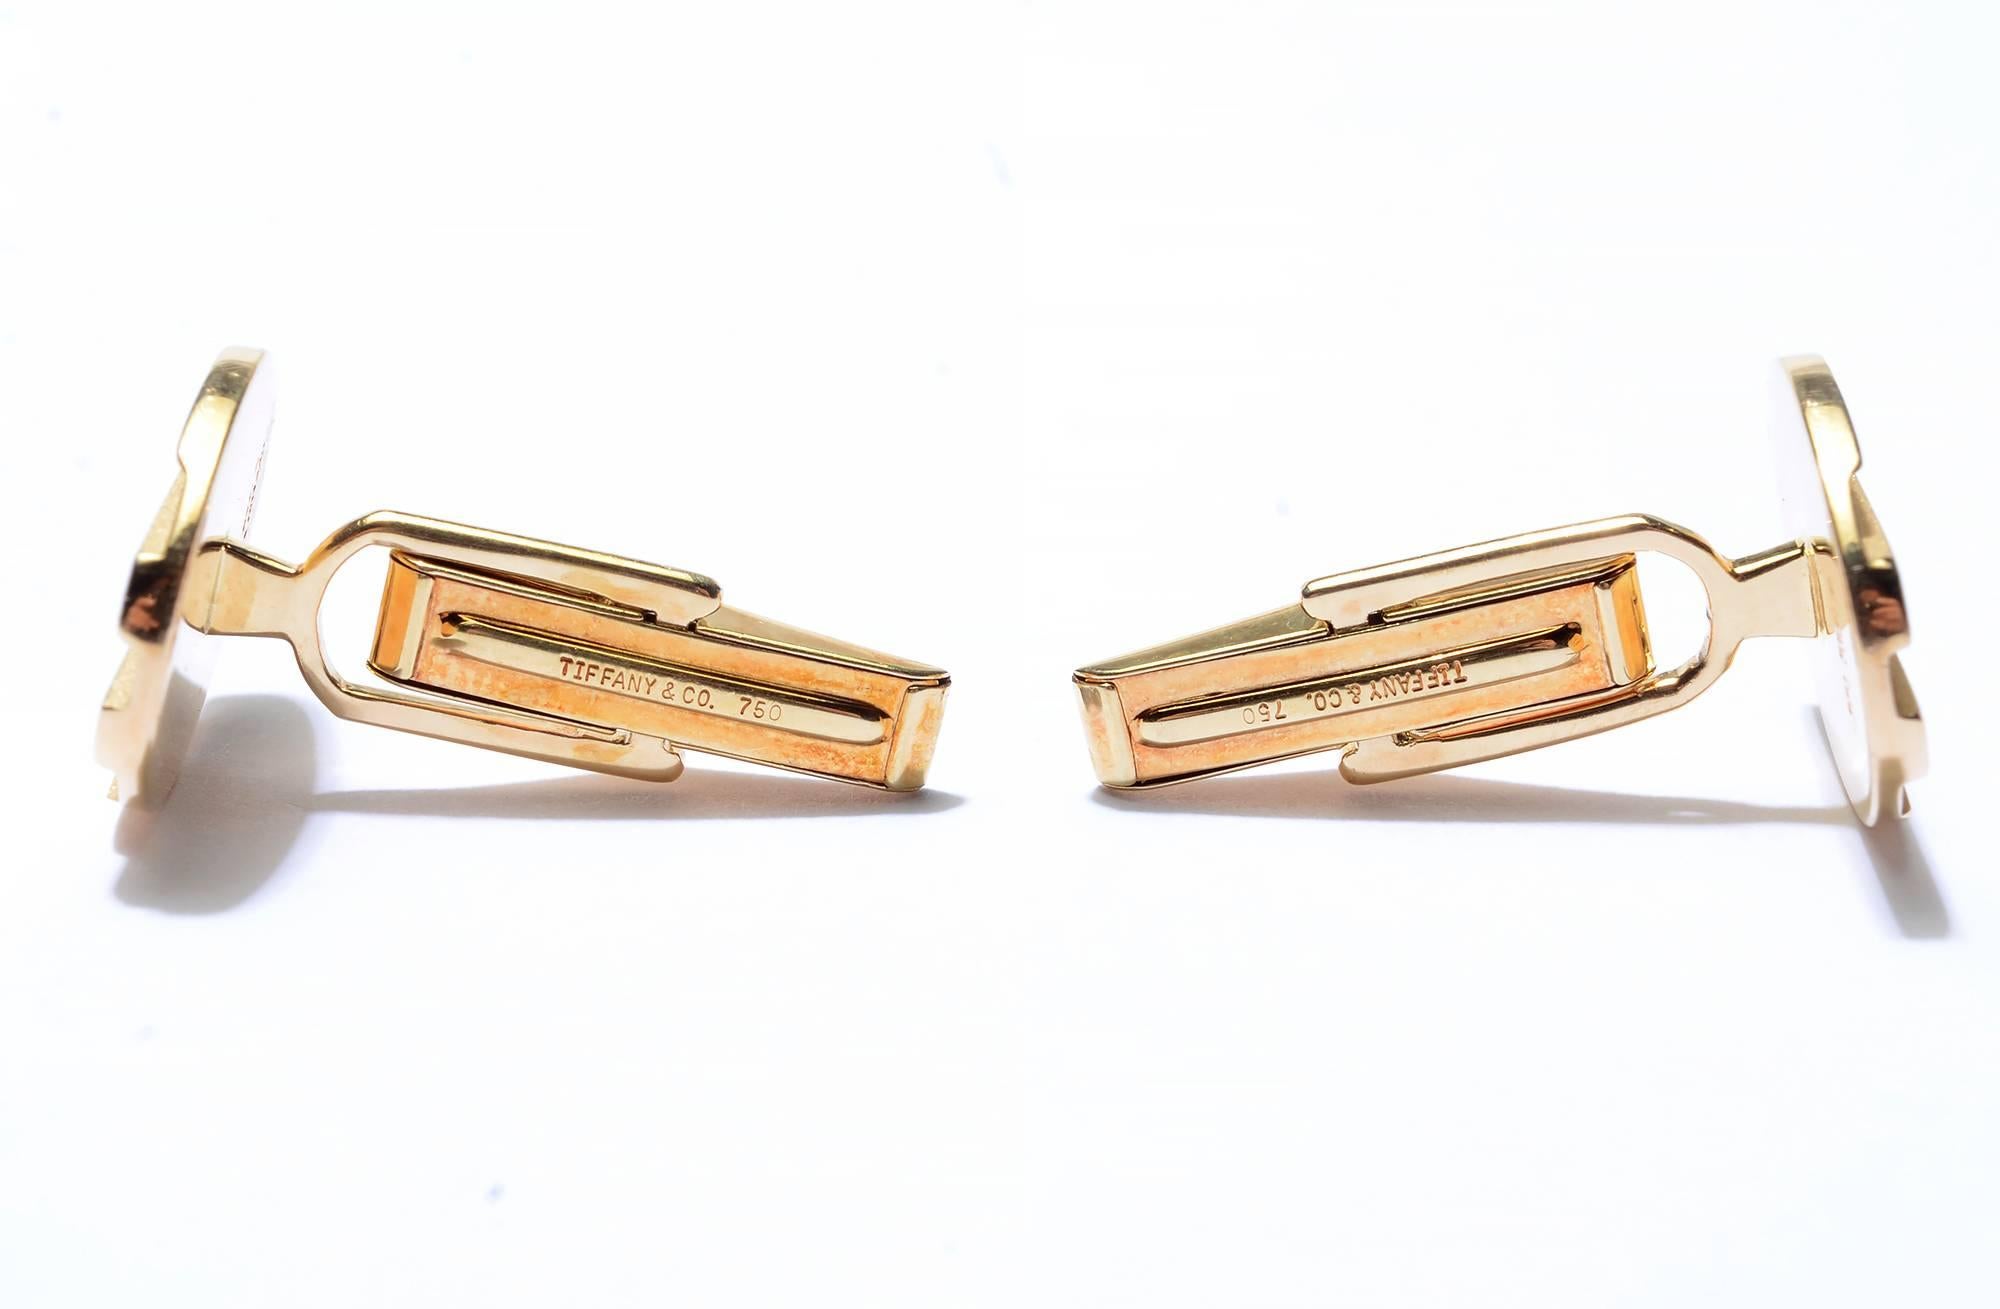 Tailored eighteen karat gold cufflinks by Tiffany & Co. They have two different finishes. The raised bars have a glossy finish and the lower areas have a finely granulated surface. Measurements are 3/4